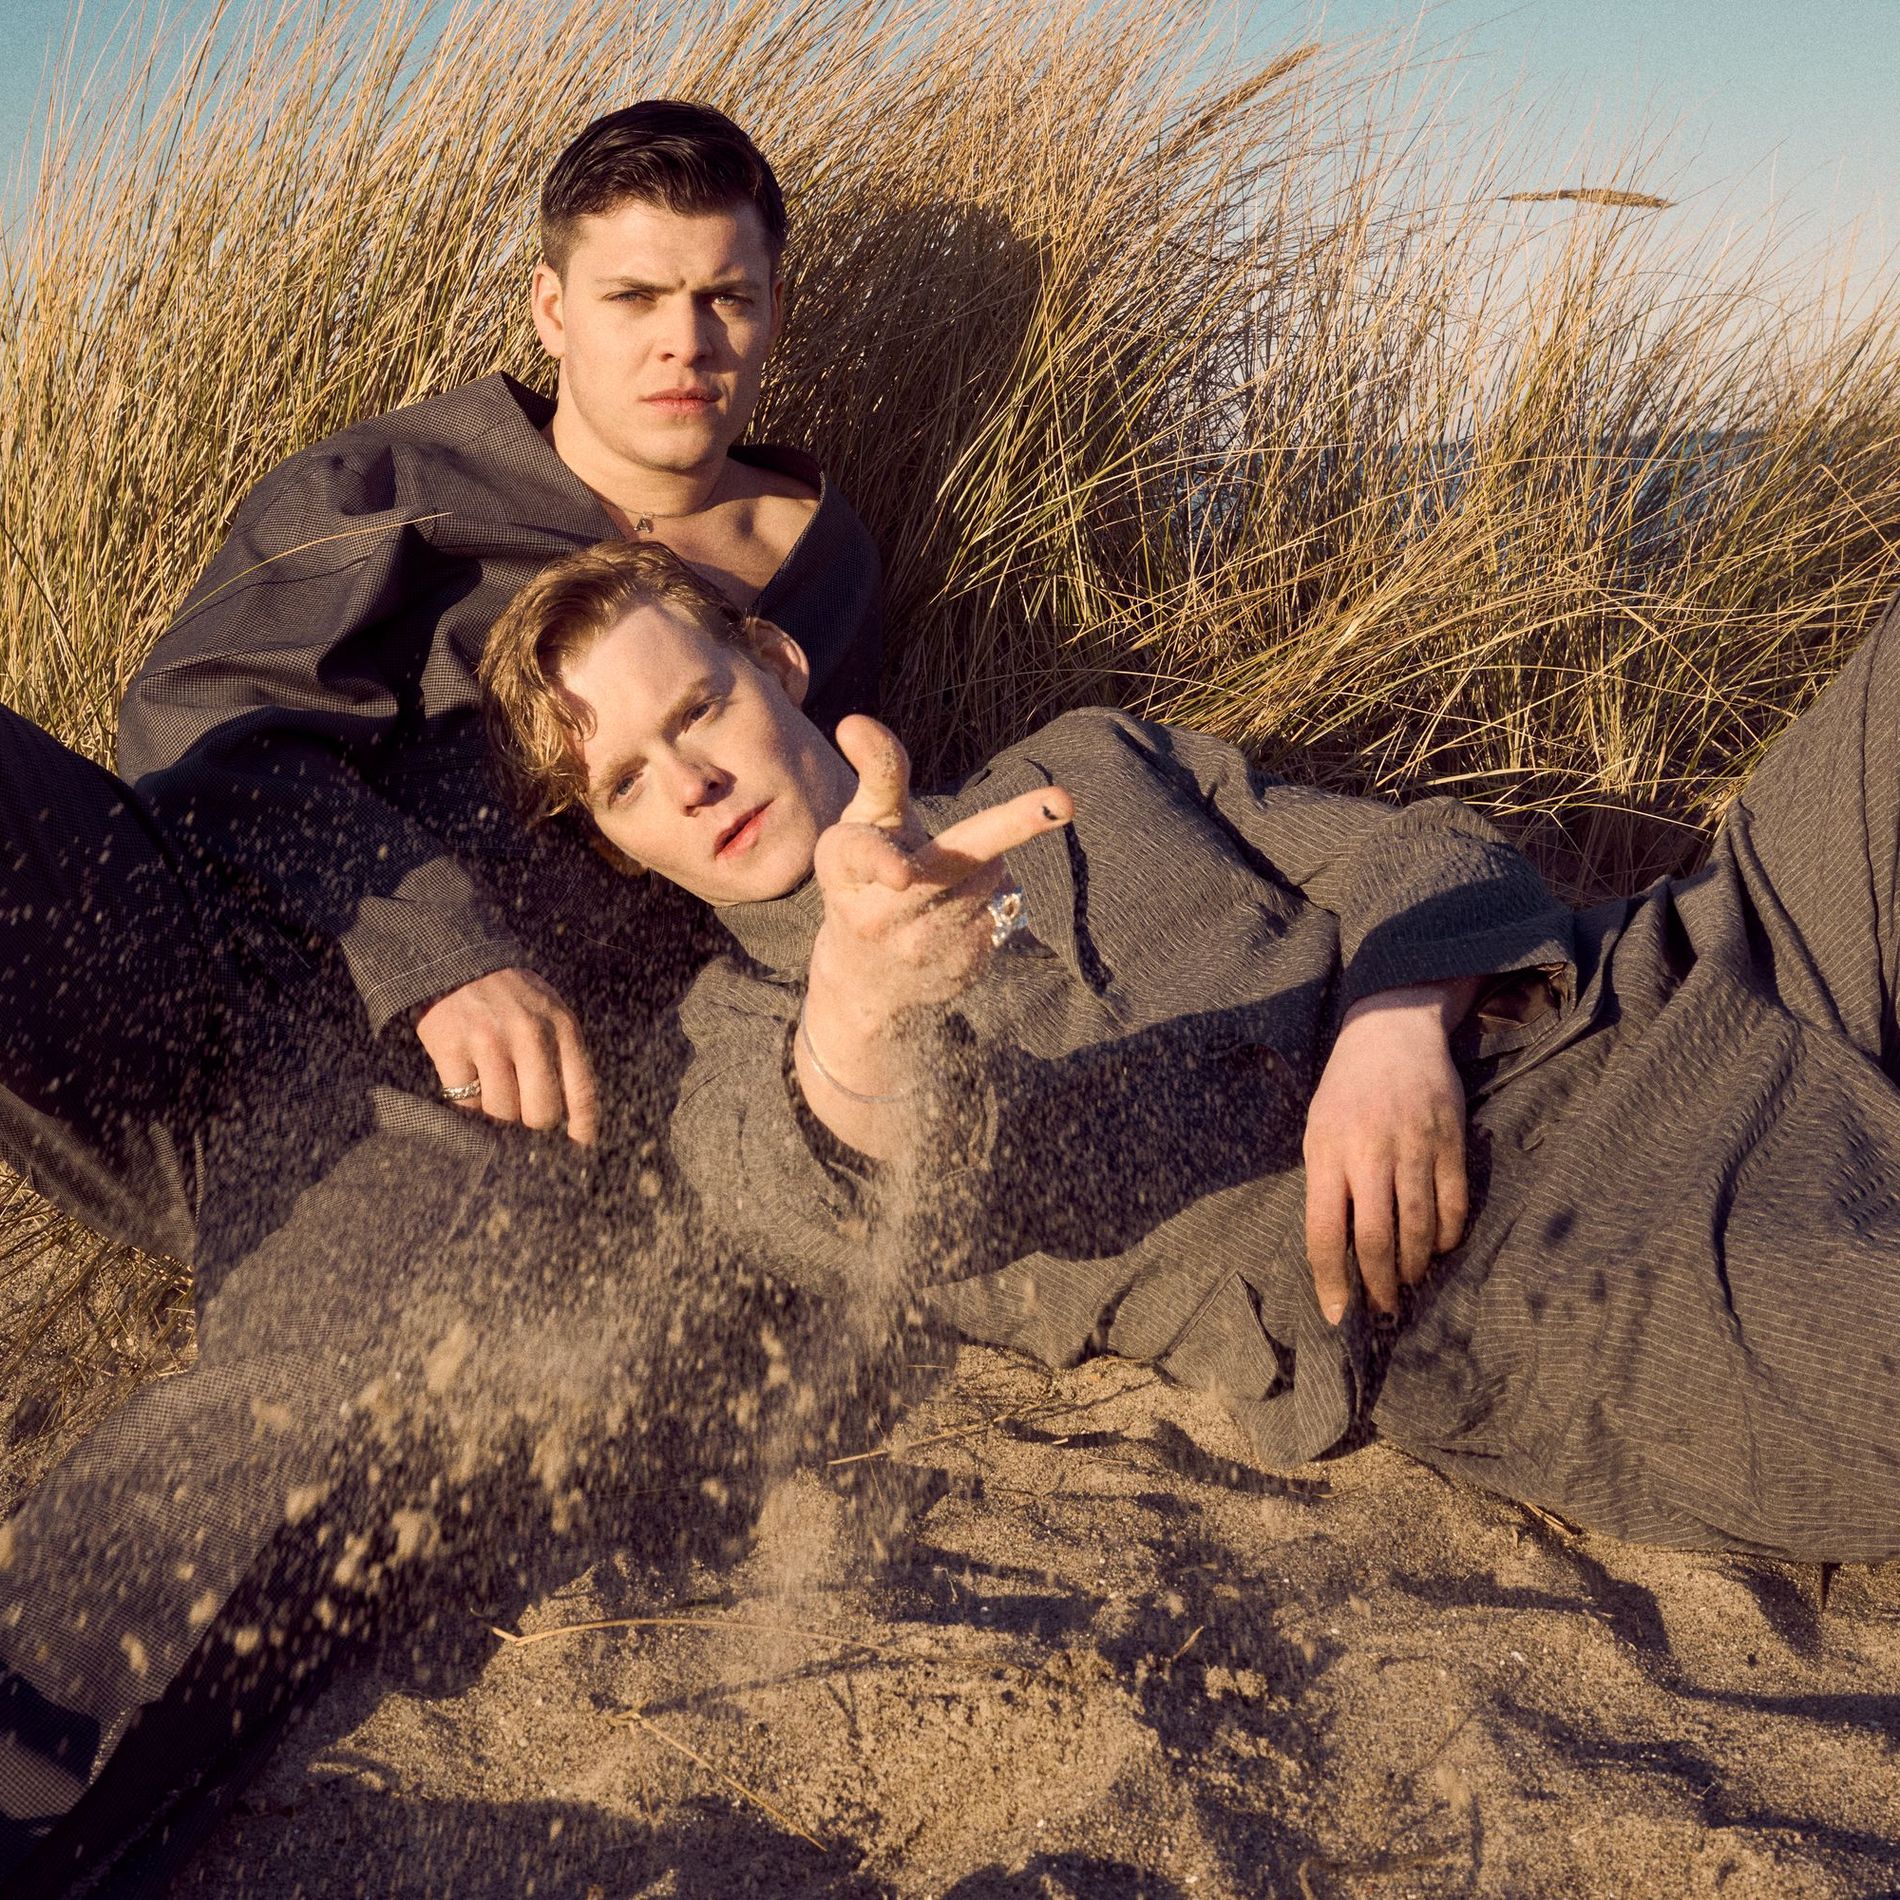 Brothers in charms: Get to know Denmark's hottest young acting talents -  Vogue Scandinavia